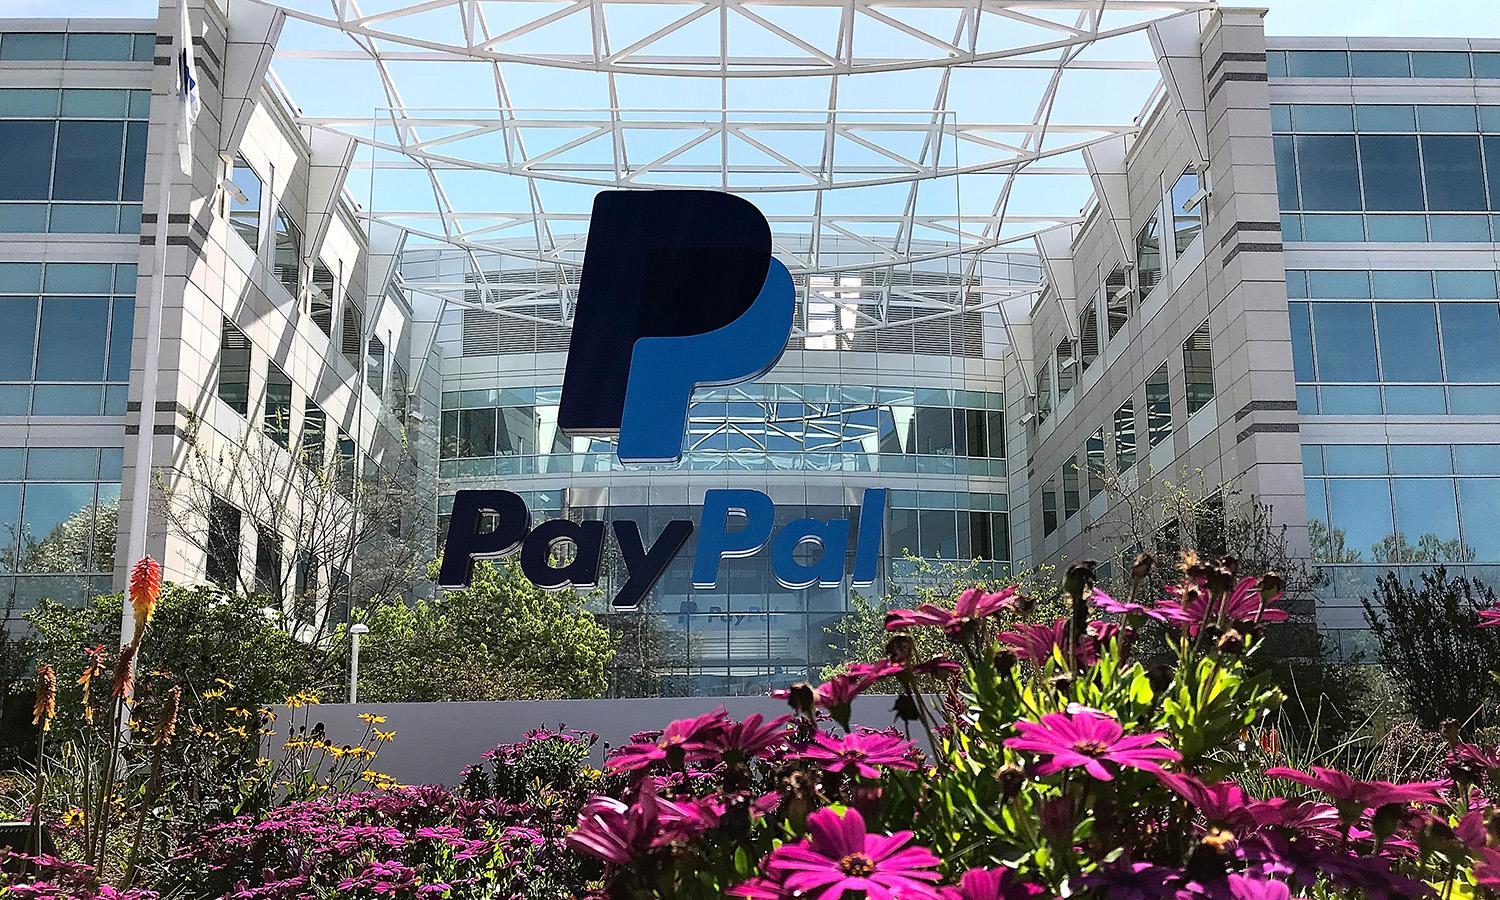 New technologies like artificial intelligence are helping make real-time payments more secure. Pictured: A sign is posted outside of the PayPal headquarters on April 9, 2018, in San Jose, Calif. (Photo by Justin Sullivan/Getty Images)